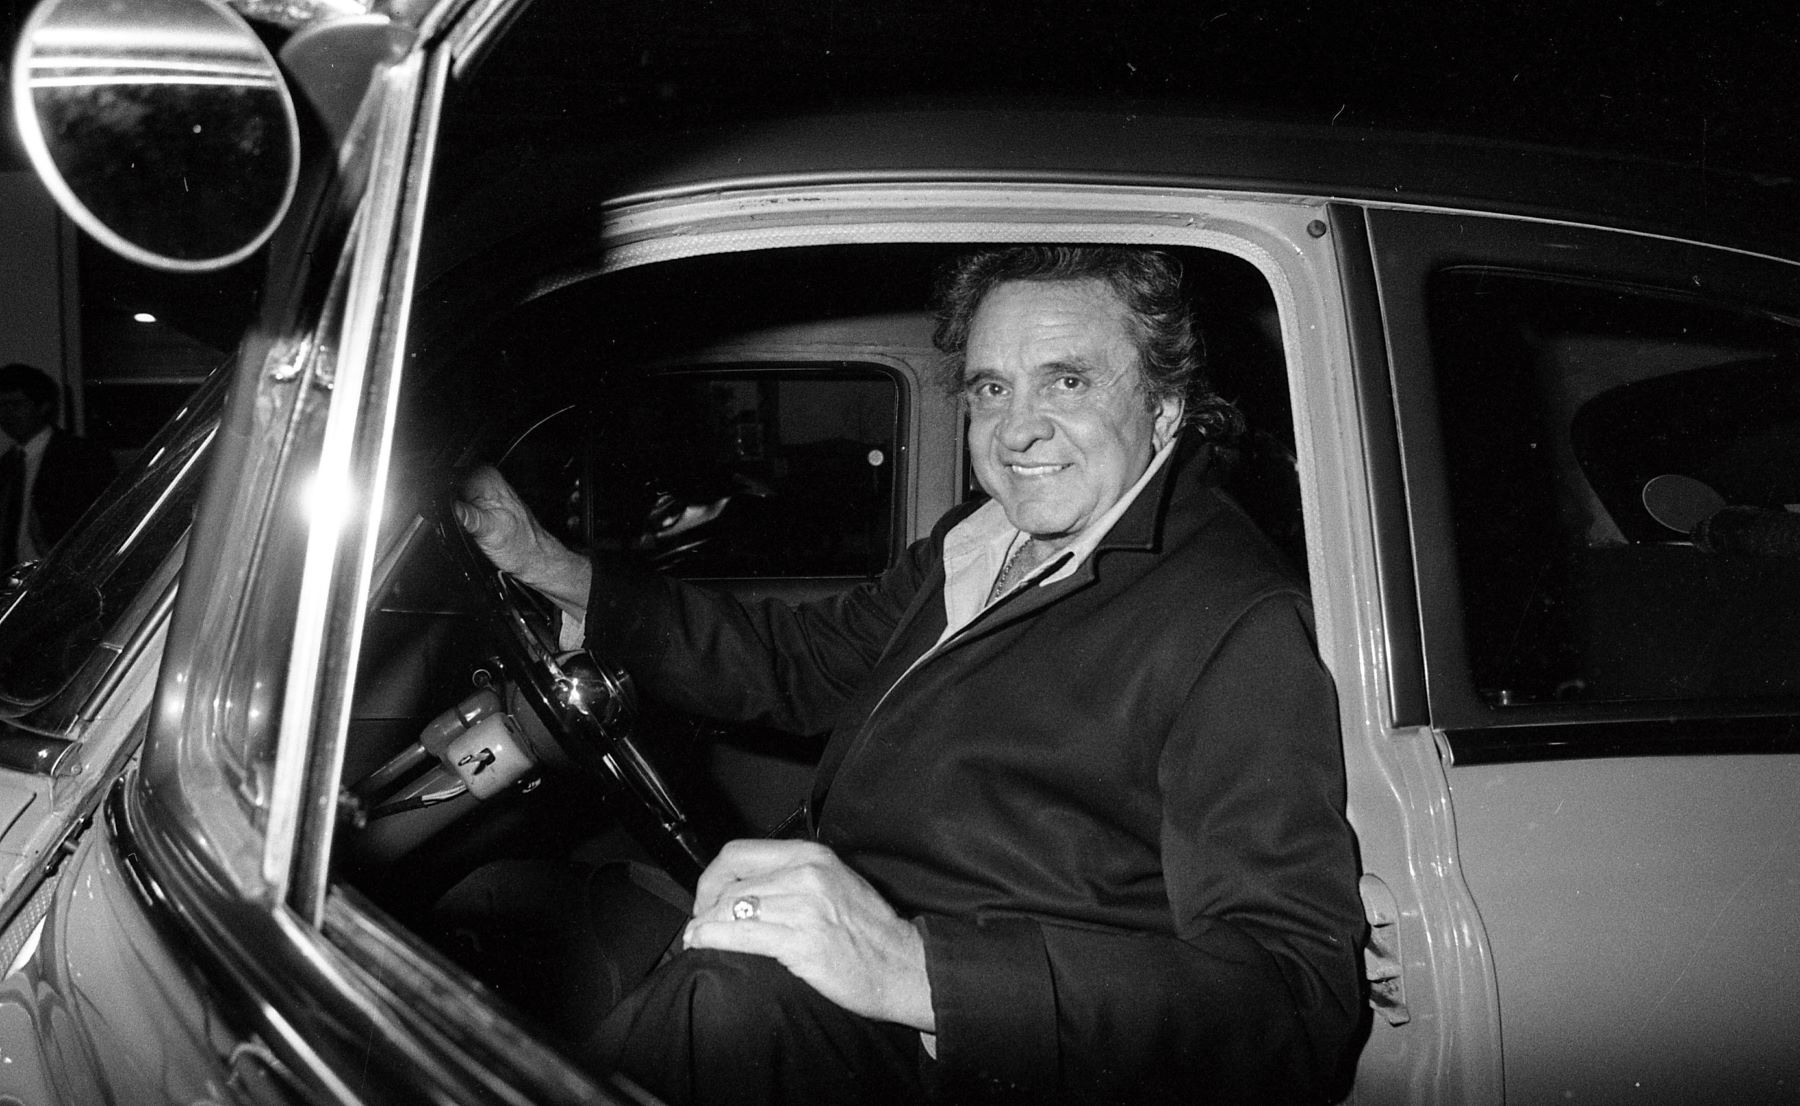 Johnny Cash driving in a 1950 Pontiac, seen at the Dublin Airpot in Ireland